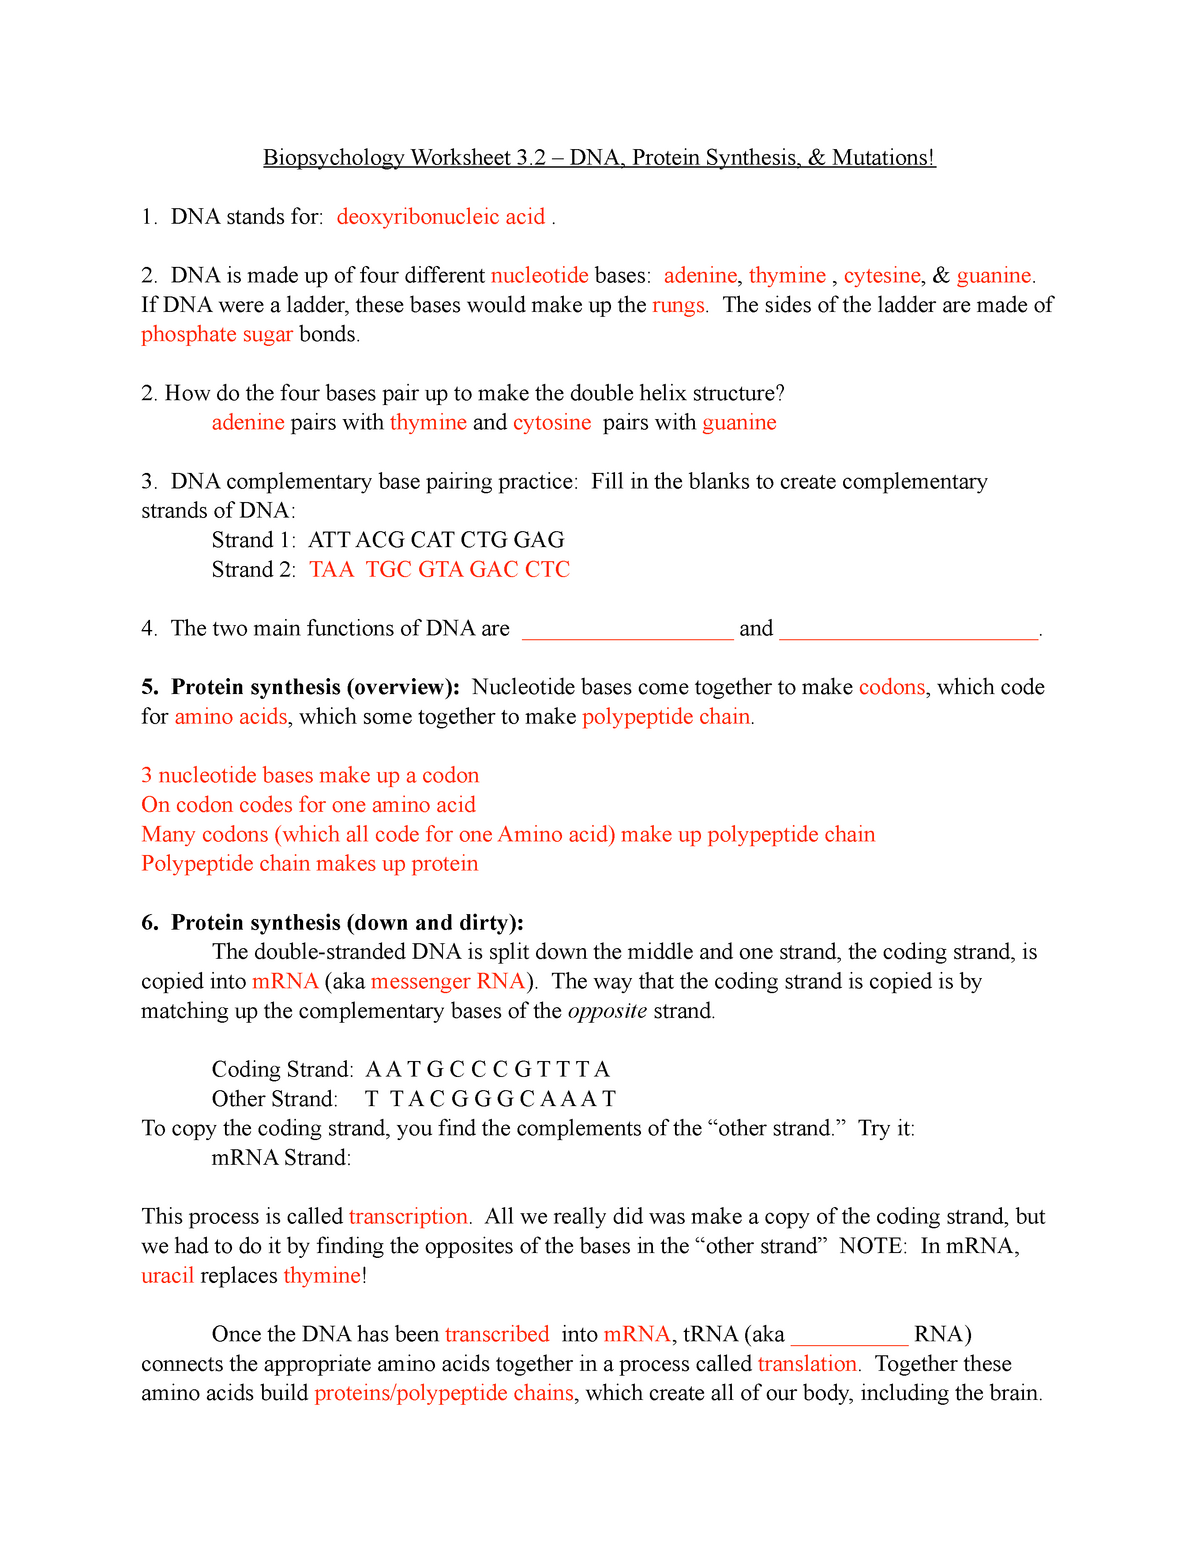 SI 200.20 DNA Protéine Synthesis Mutations - Biopsychology Worksheet With Regard To Protein Synthesis Review Worksheet Answers